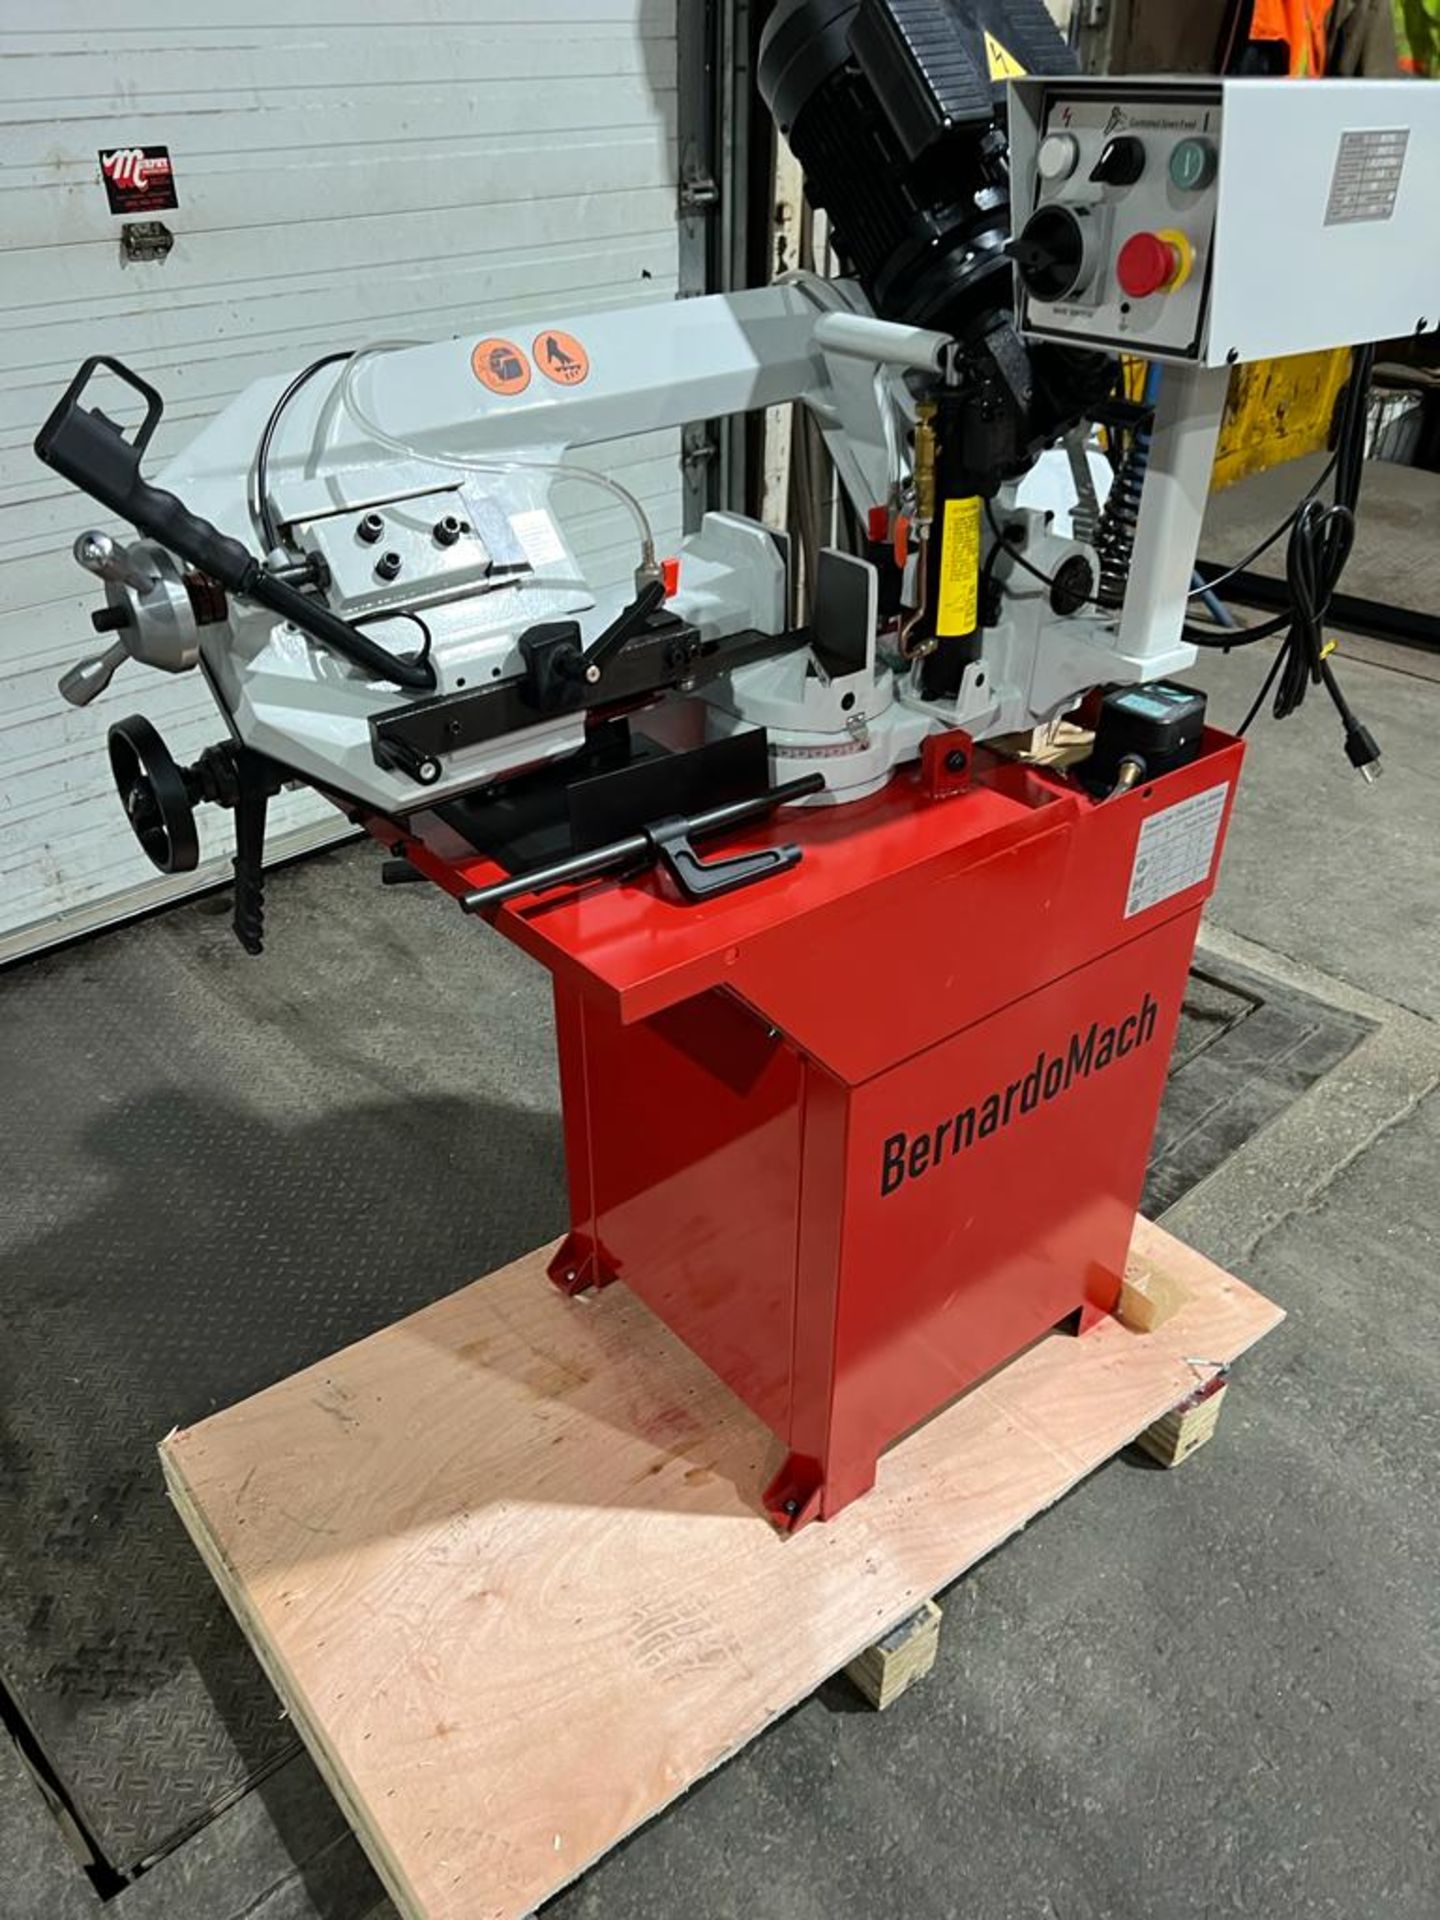 BernardoMach Horizontal Band Saw - GEAR DRIVEN MOTOR with POWER HEAD with Automatic & Manual cut - - Image 5 of 5